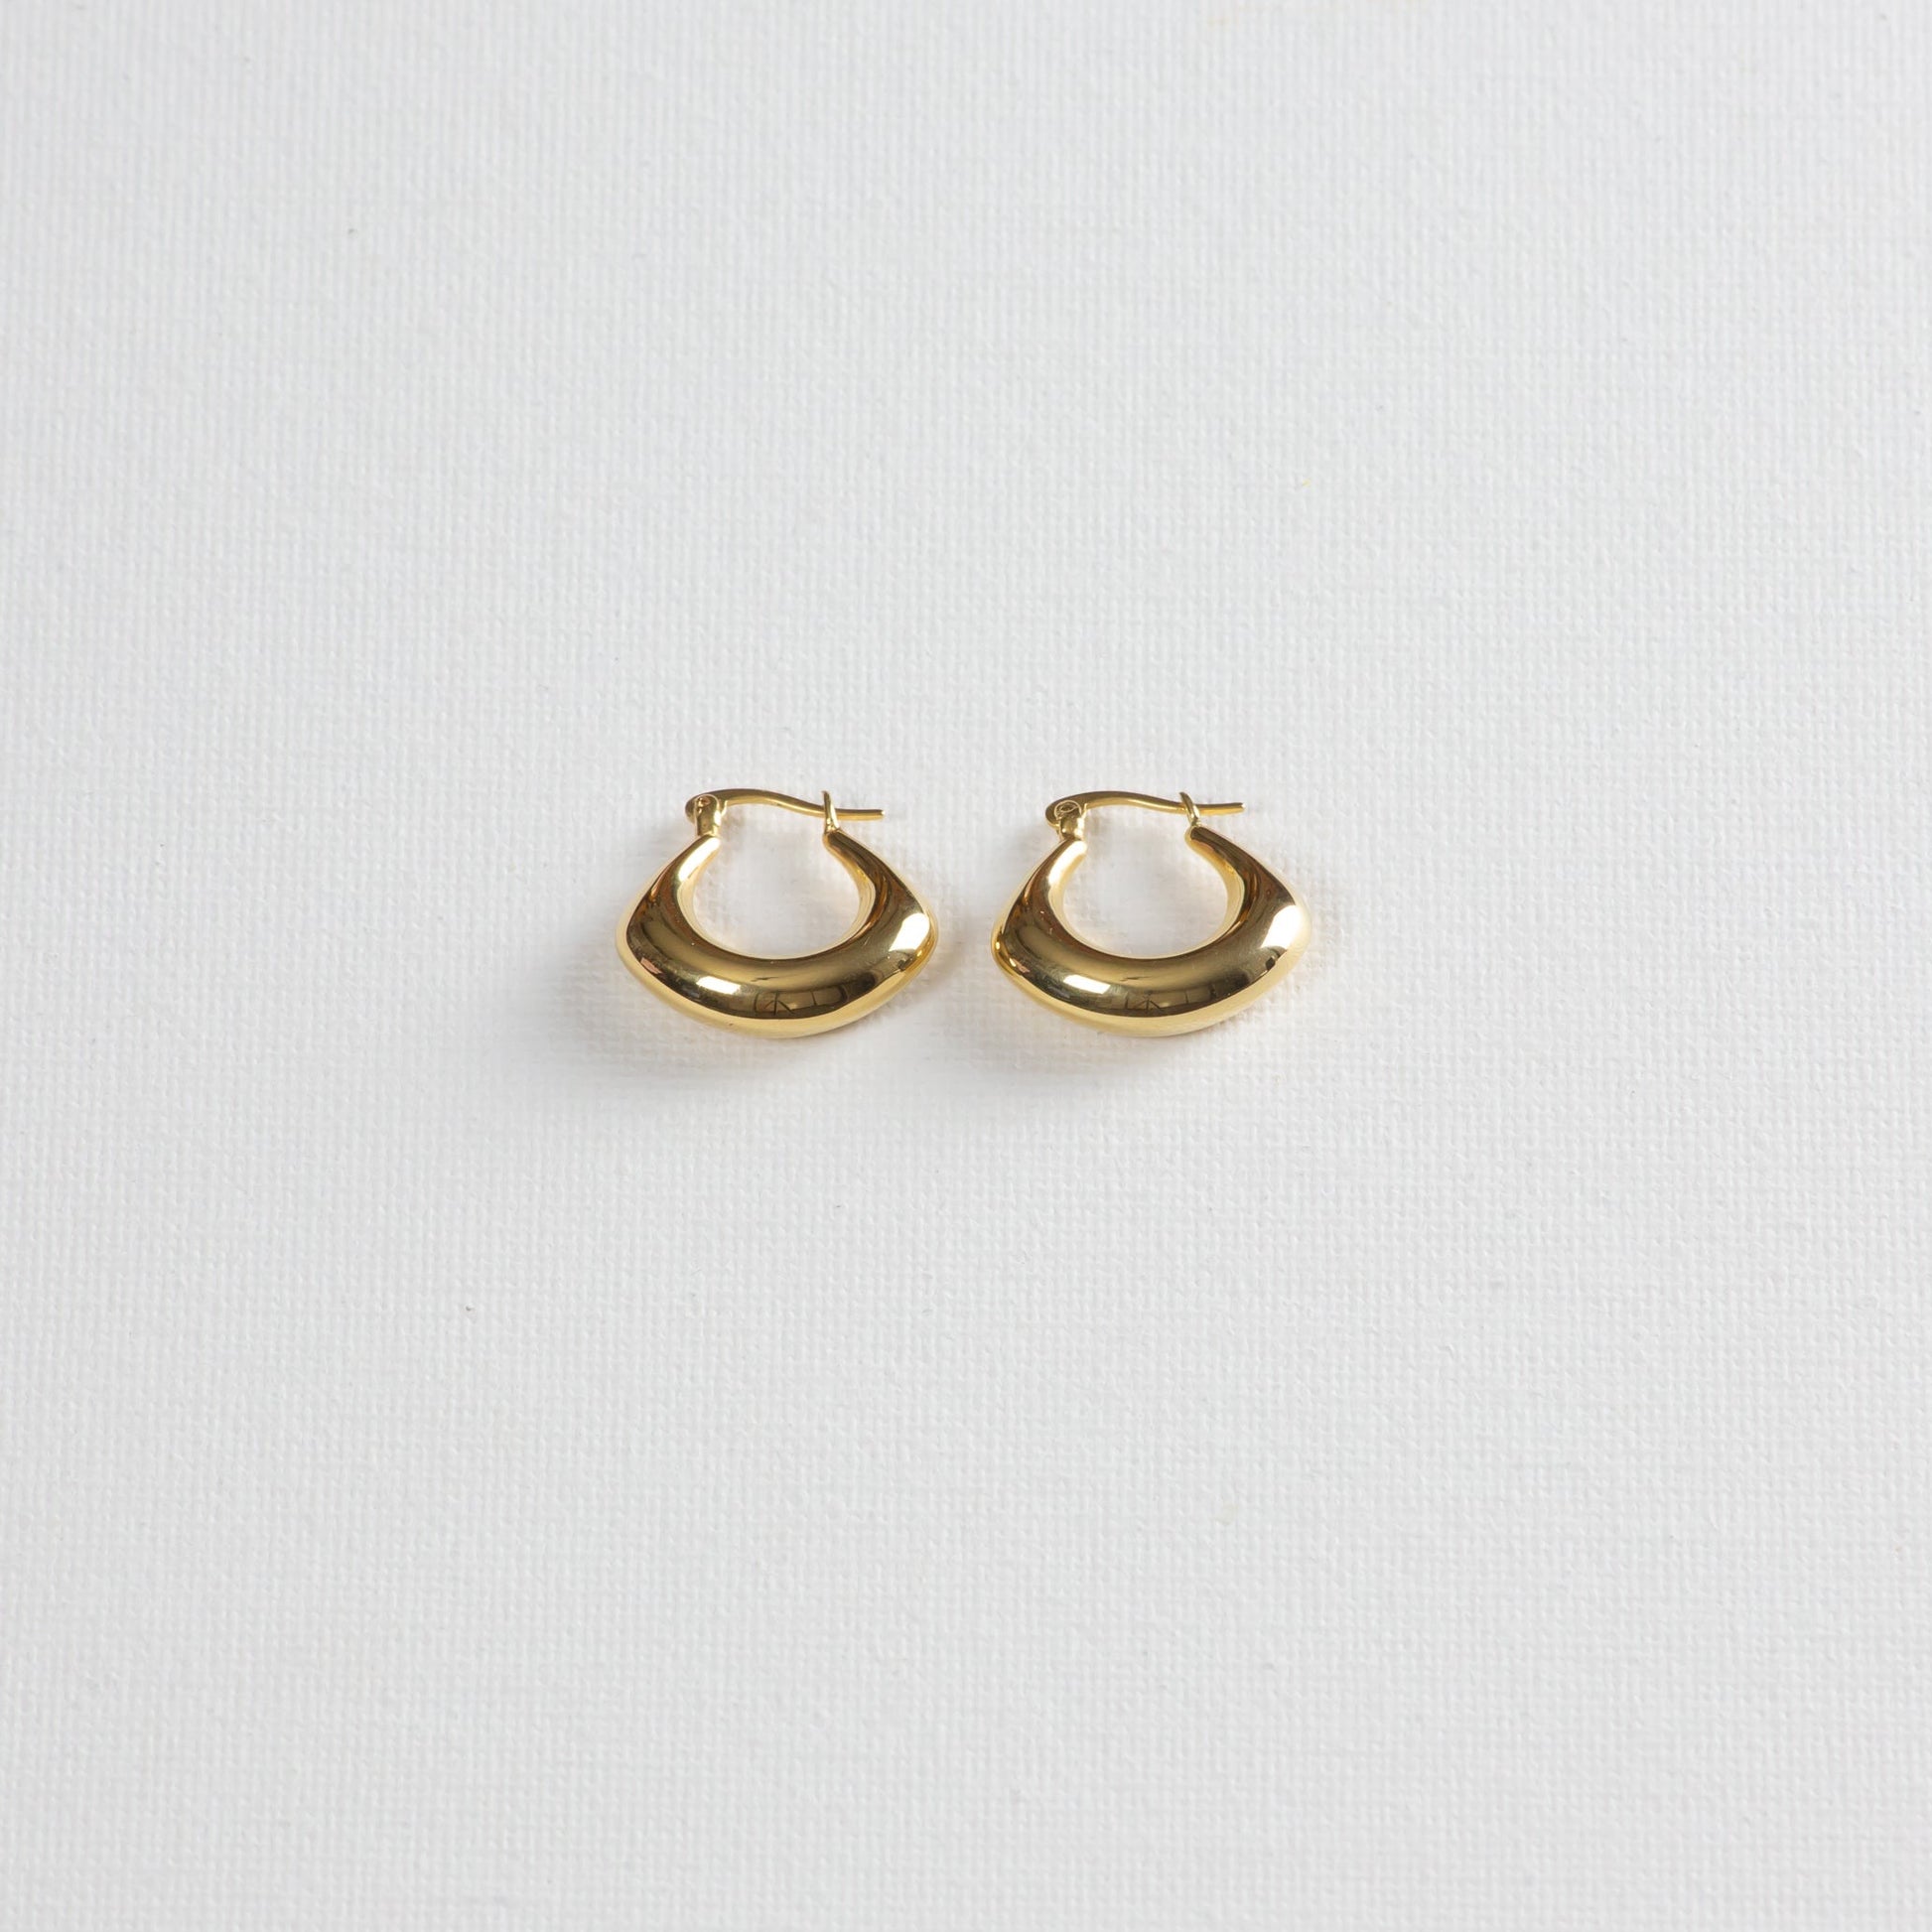 Spade earrings placed on a white background, photographed from a slight angle from the bottom.